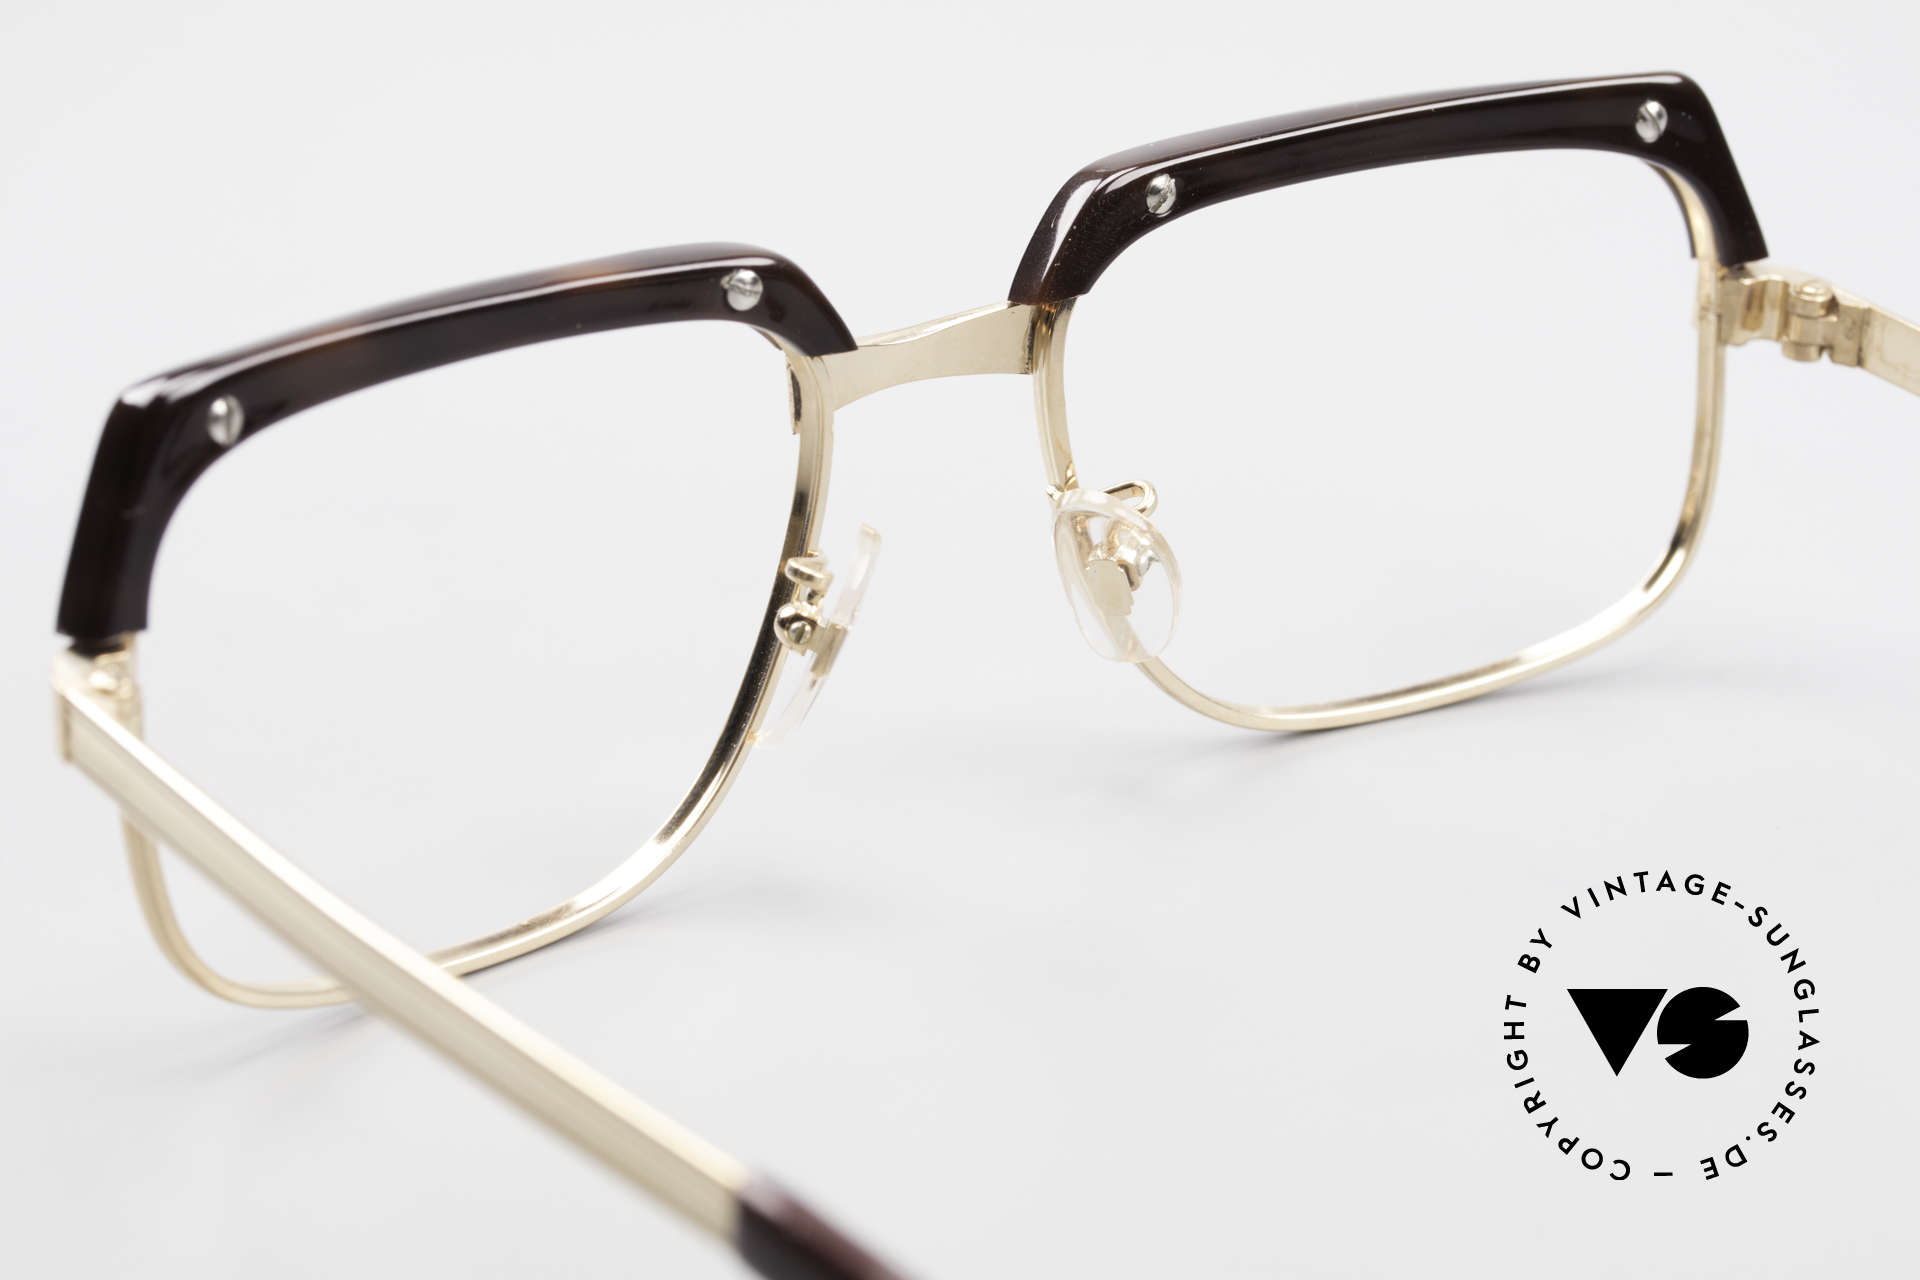 Selecta - Dalai Lama Pure Gold Filled Frame 70's, unworn rarity in large size 52-22 (true collector's item), Made for Men